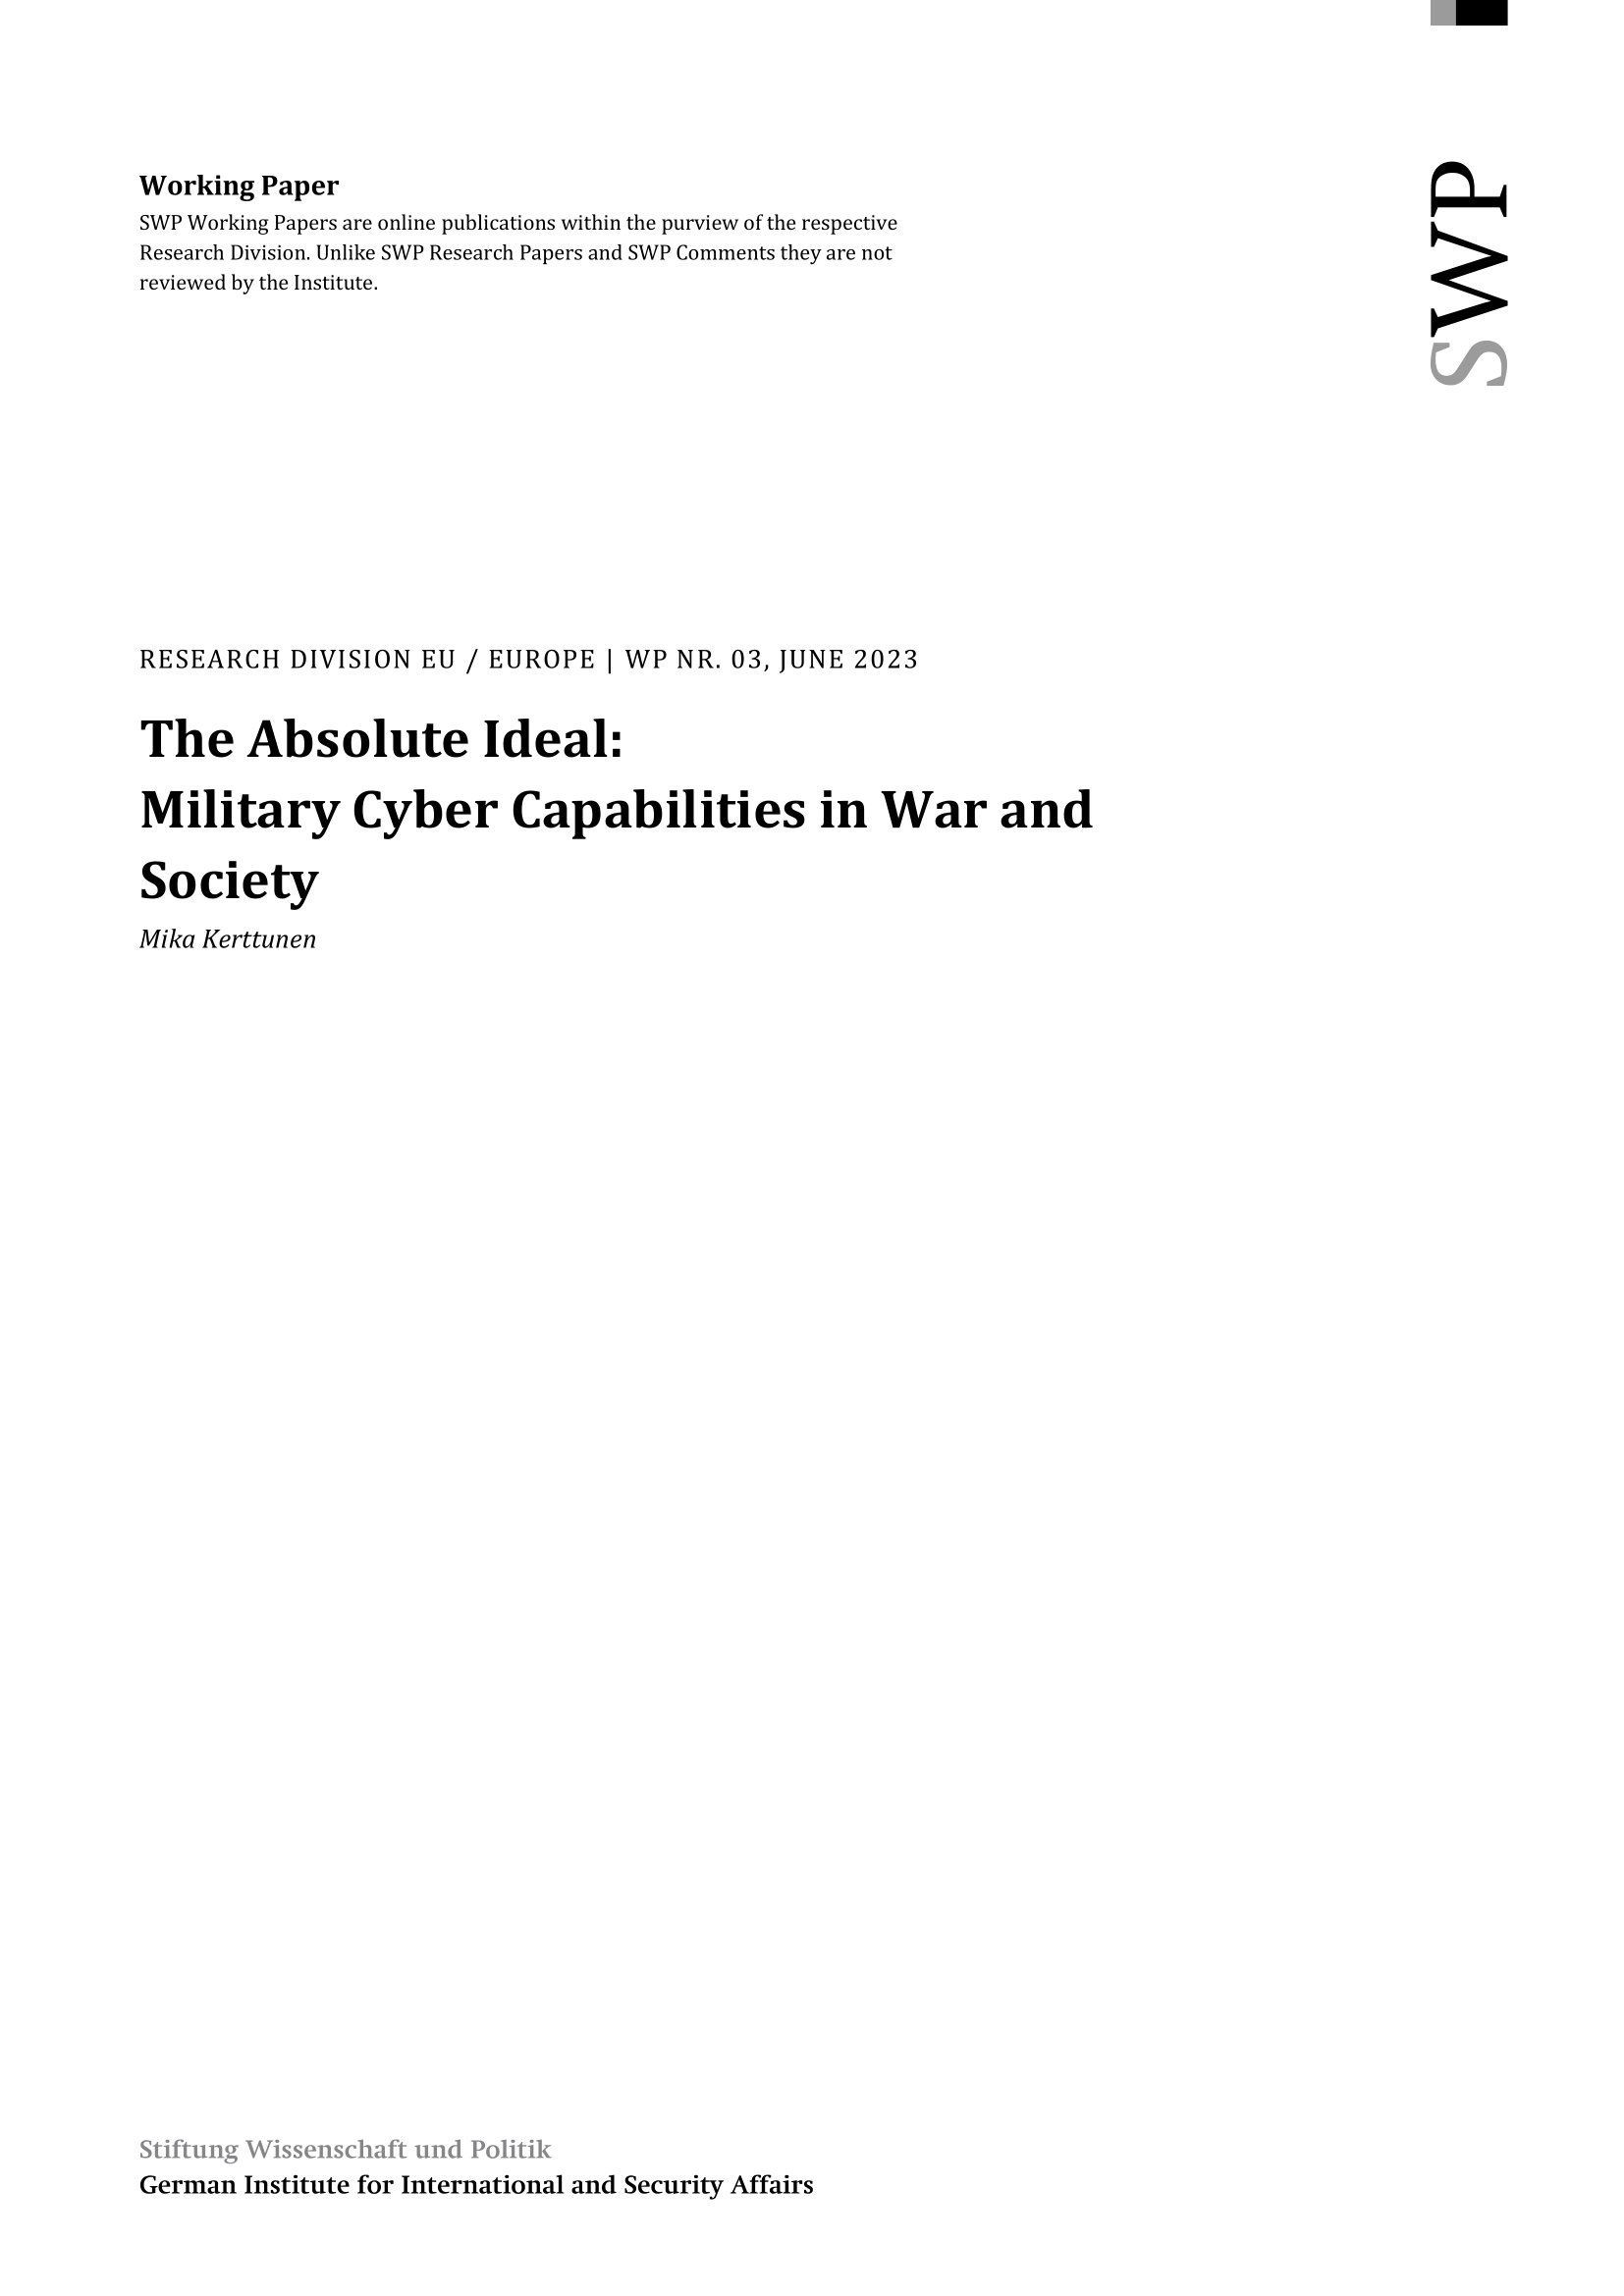 The Absolute Ideal: Military Cyber Capabilities in War and Society